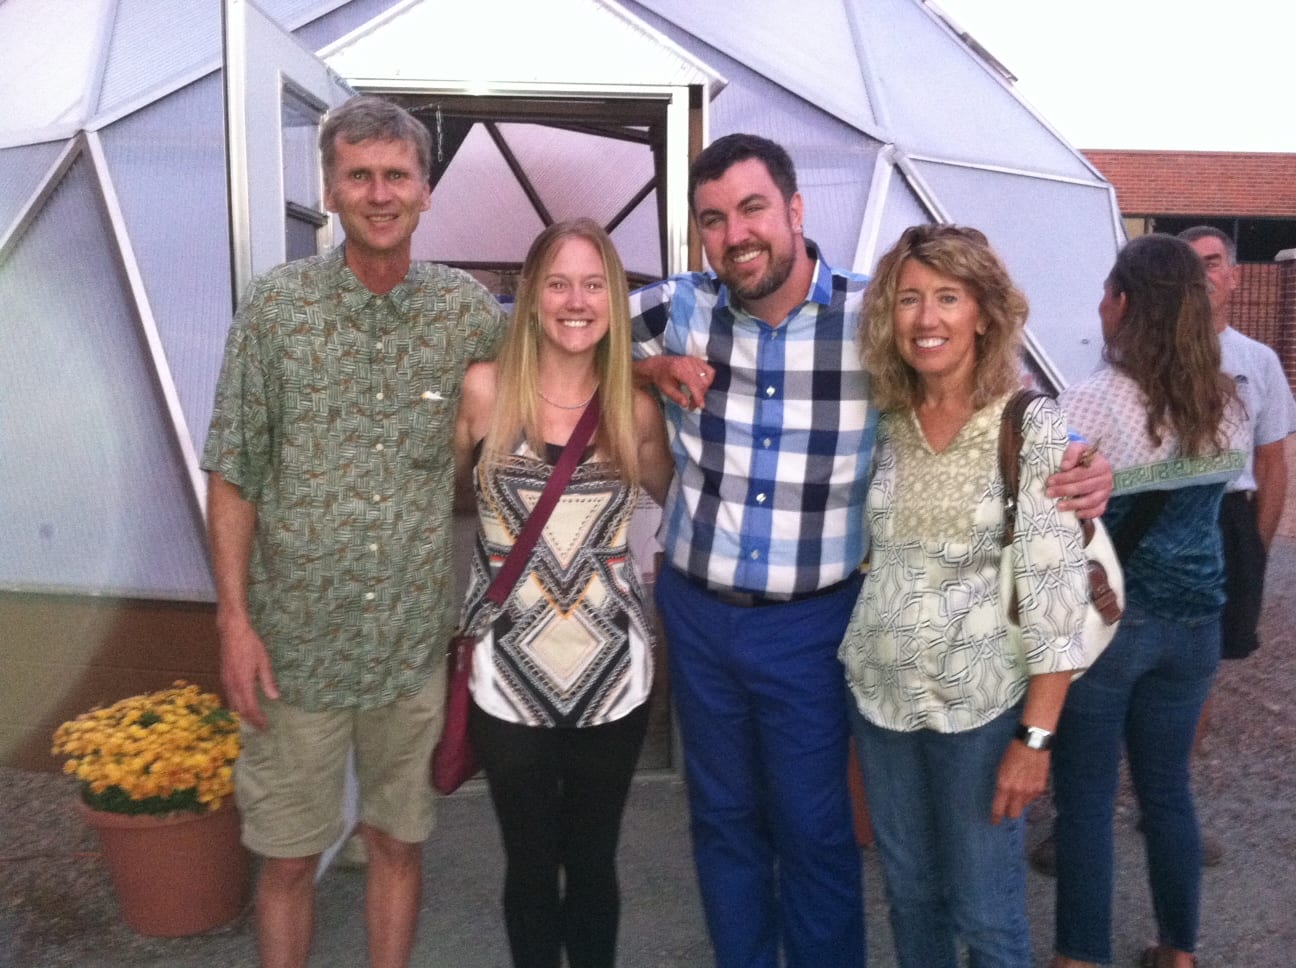 People pictured in front of a growing dome, Community Garden Grant for Growing Dome in Littleton Colorado